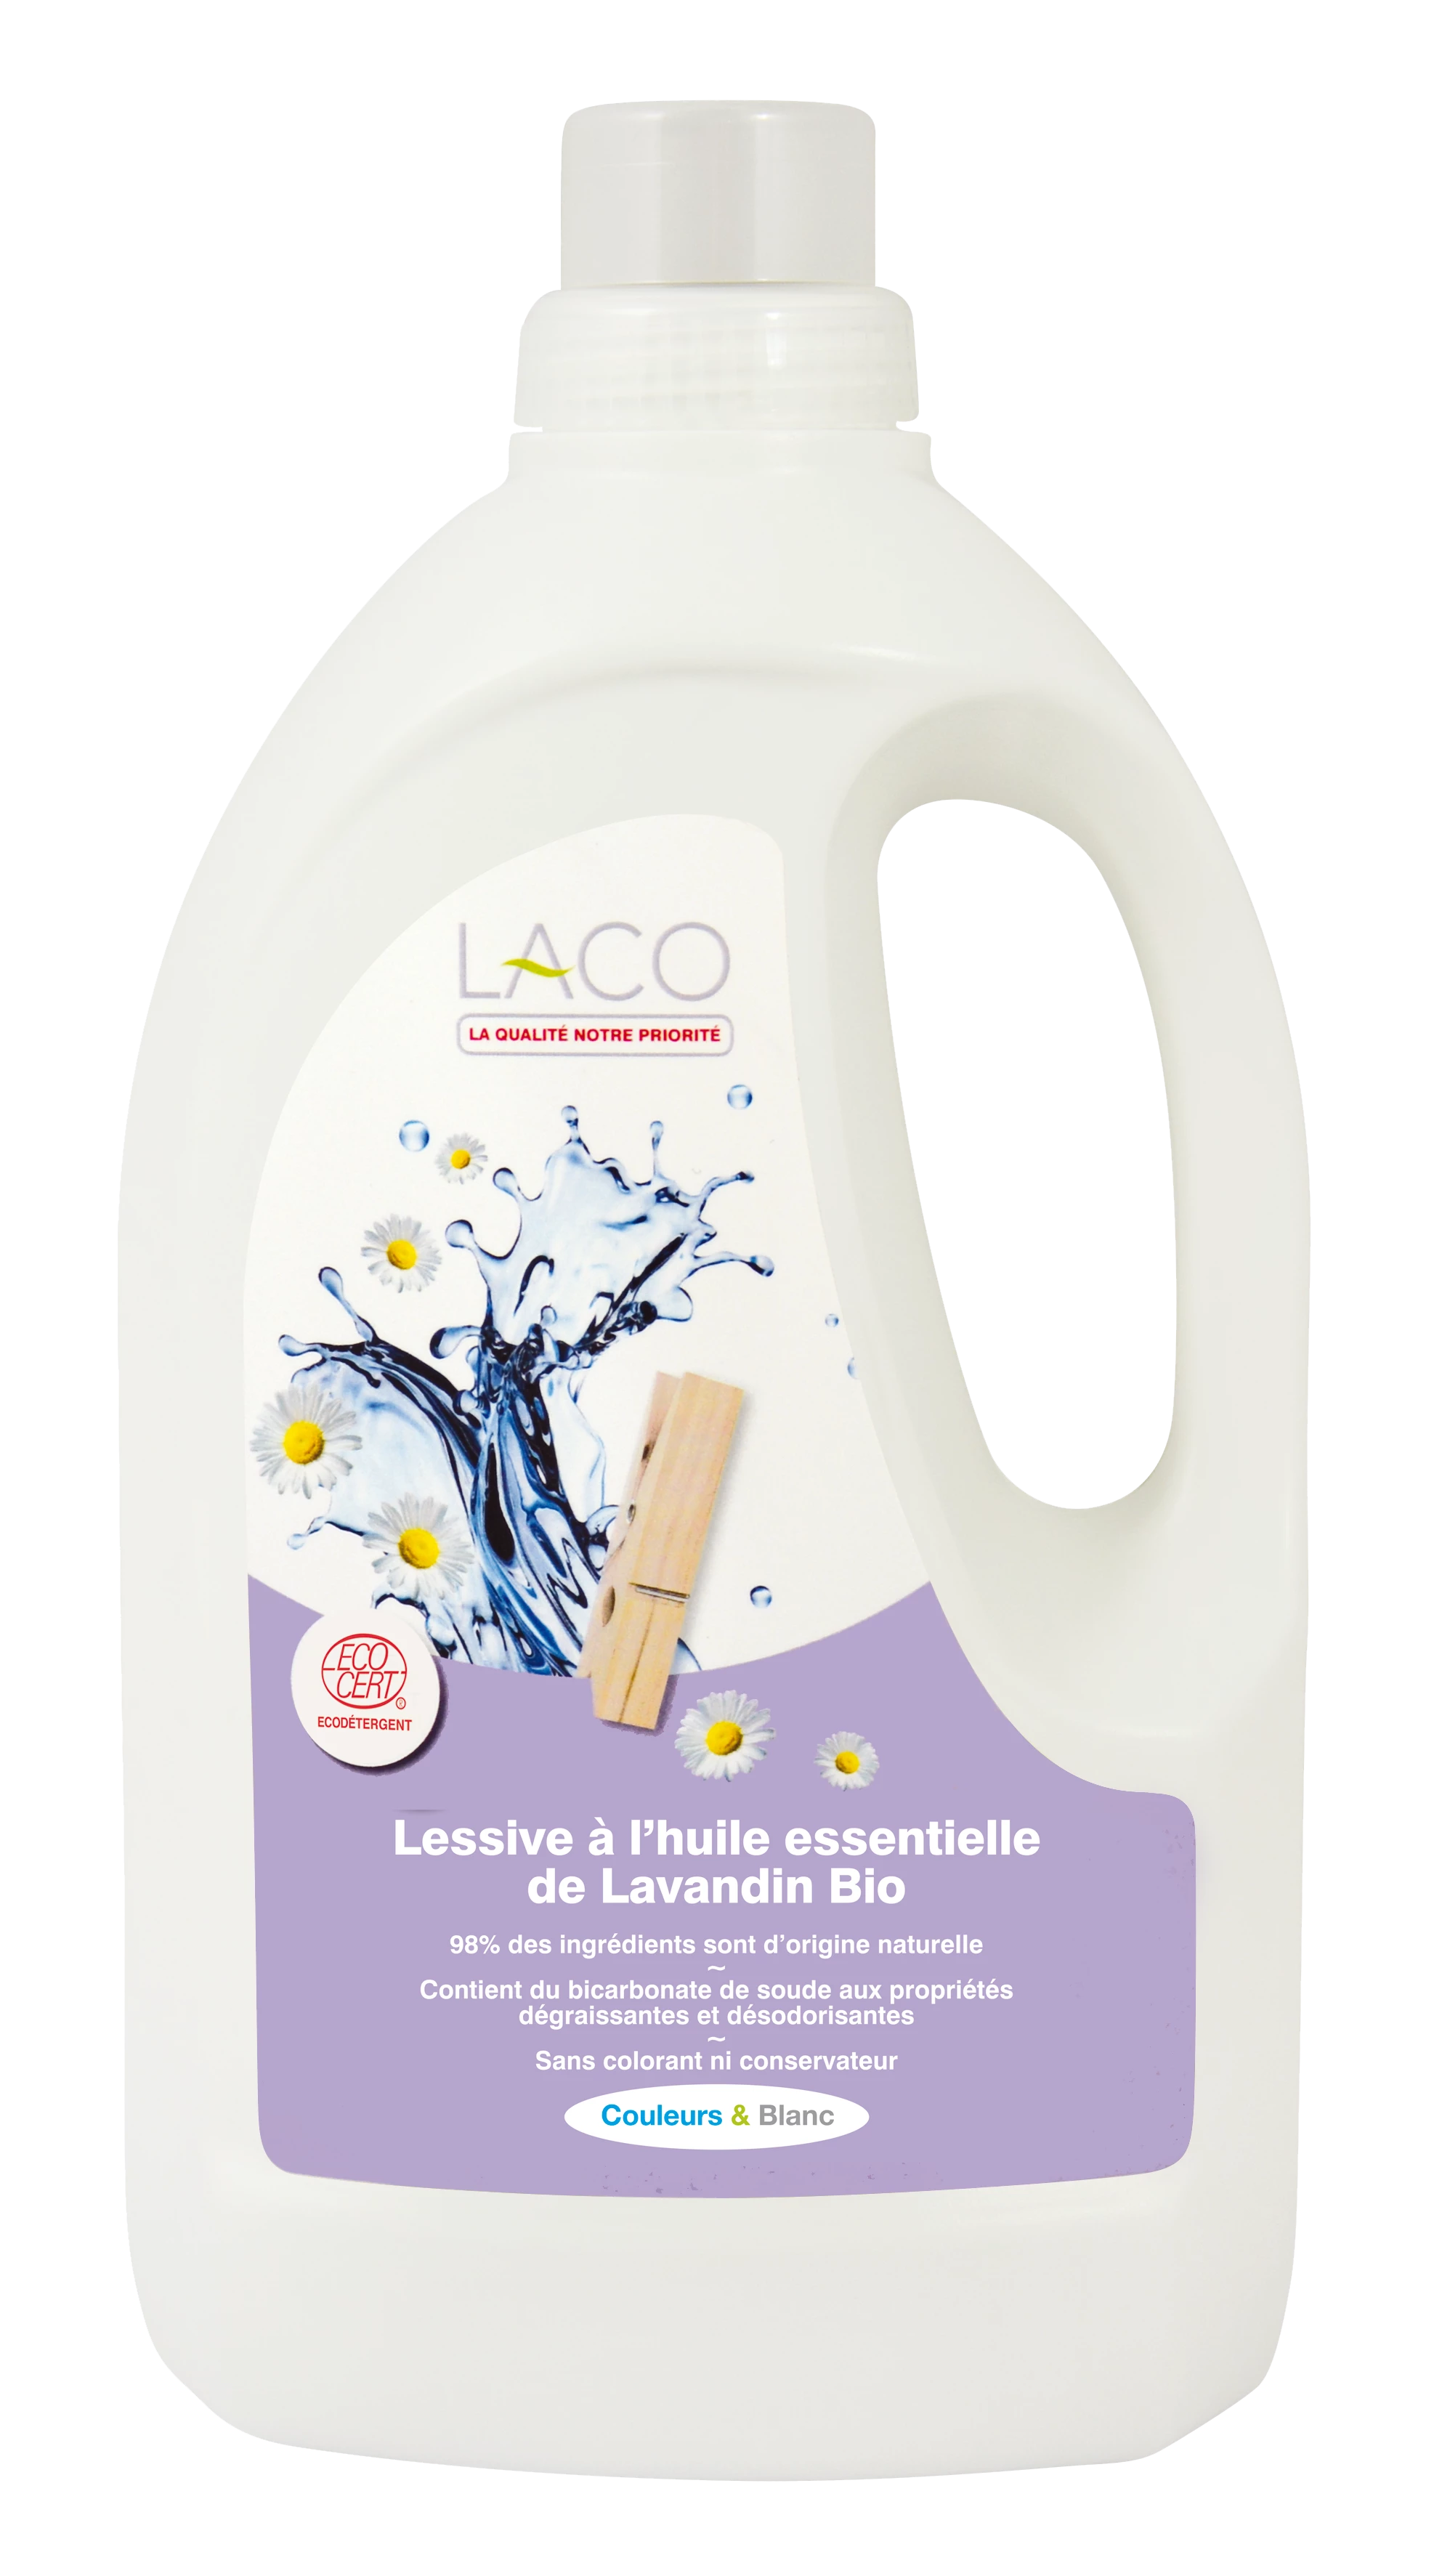 Ecological Laundry Detergent with Lavender Essential Oil 2L - LACO